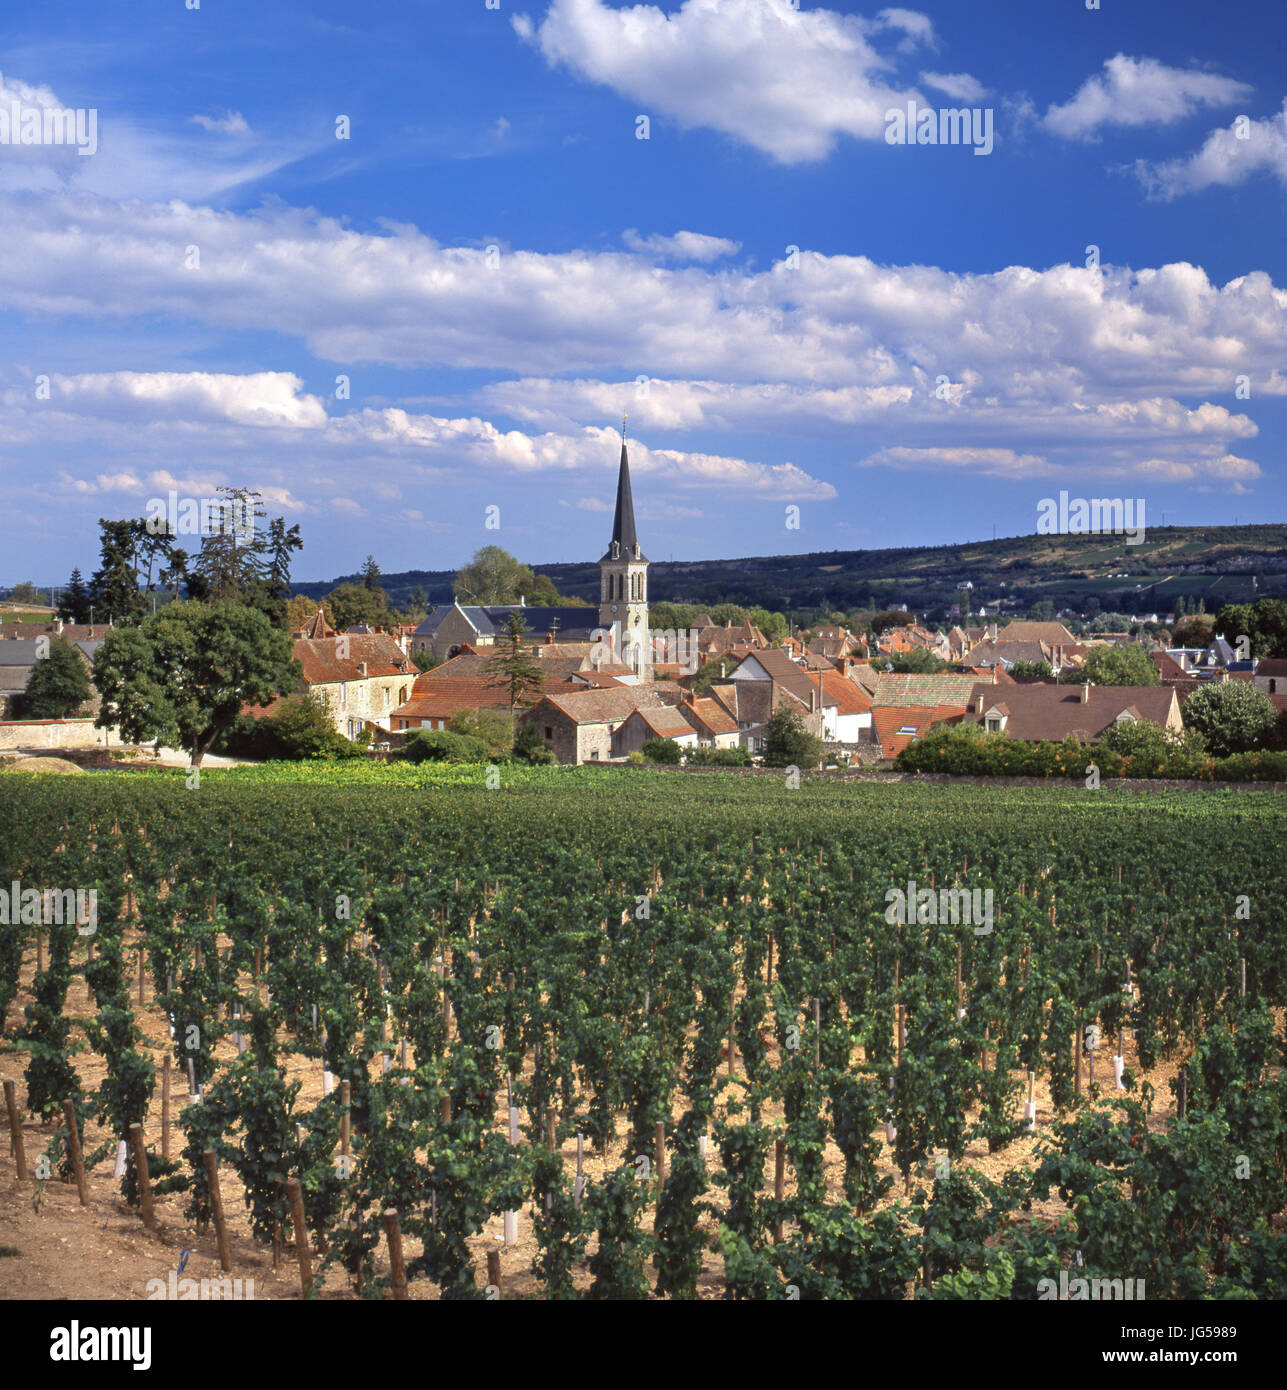 Château de Santenay vineyard, with village and church viewed from the Chateau vineyard Santenay, Côte d'Or, France. Stock Photo